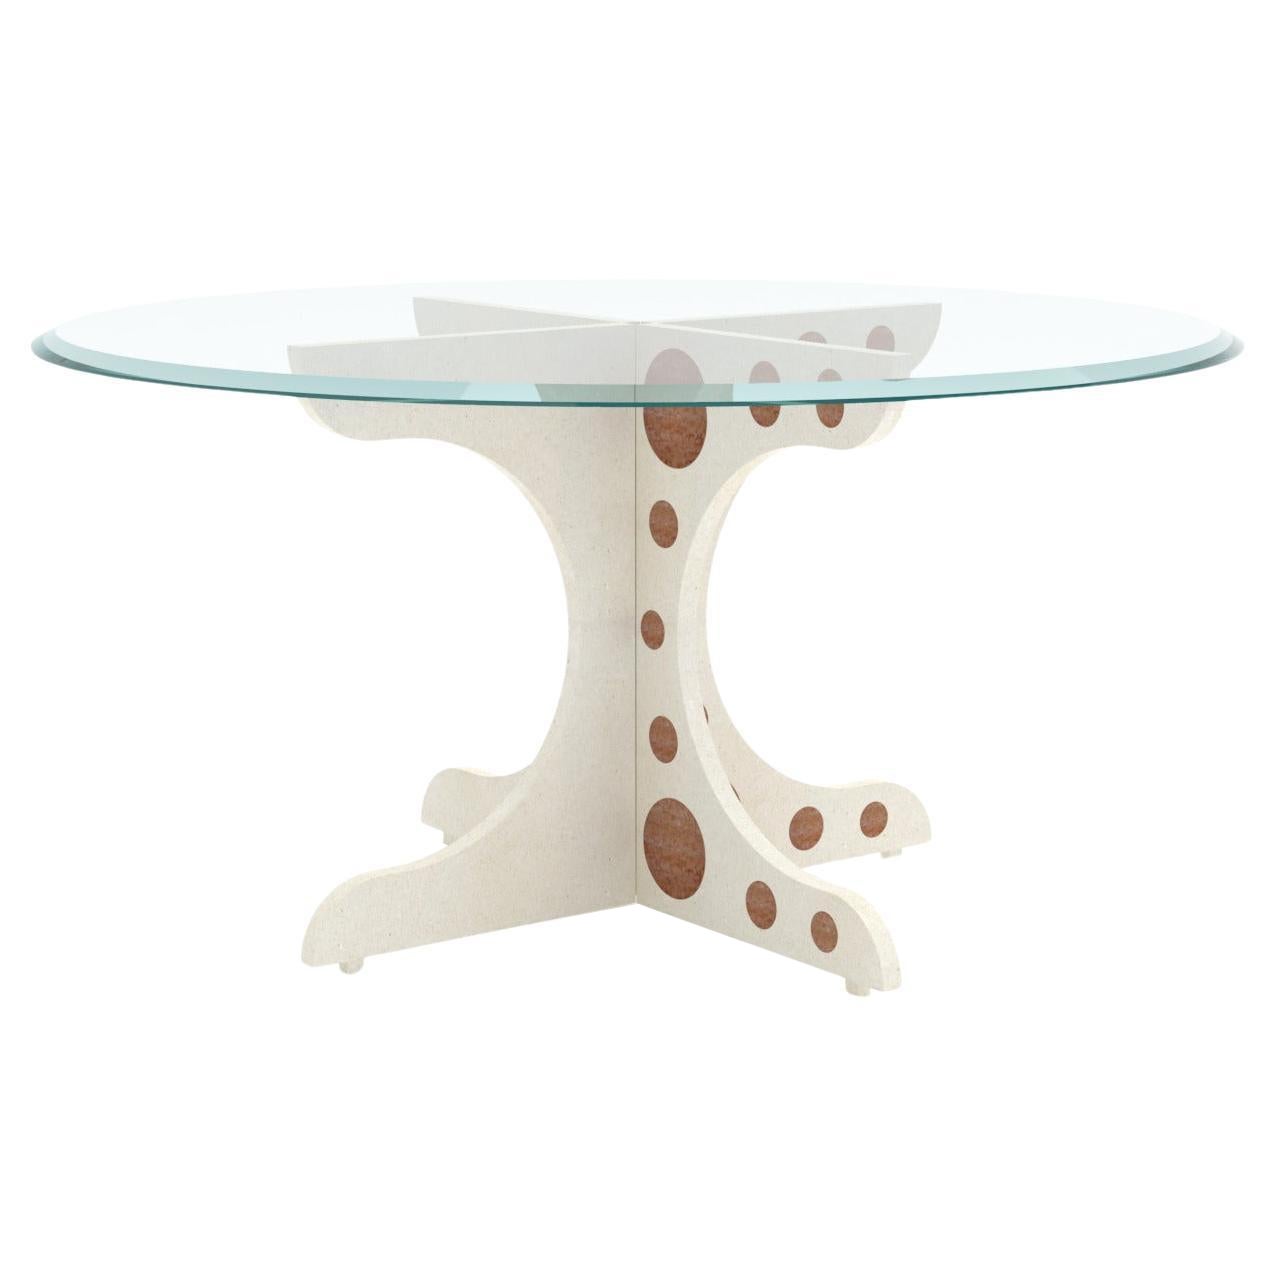 Ma-Mi, 21st Century Veselye Marble and Glass Round Coffee Table - Filling holes